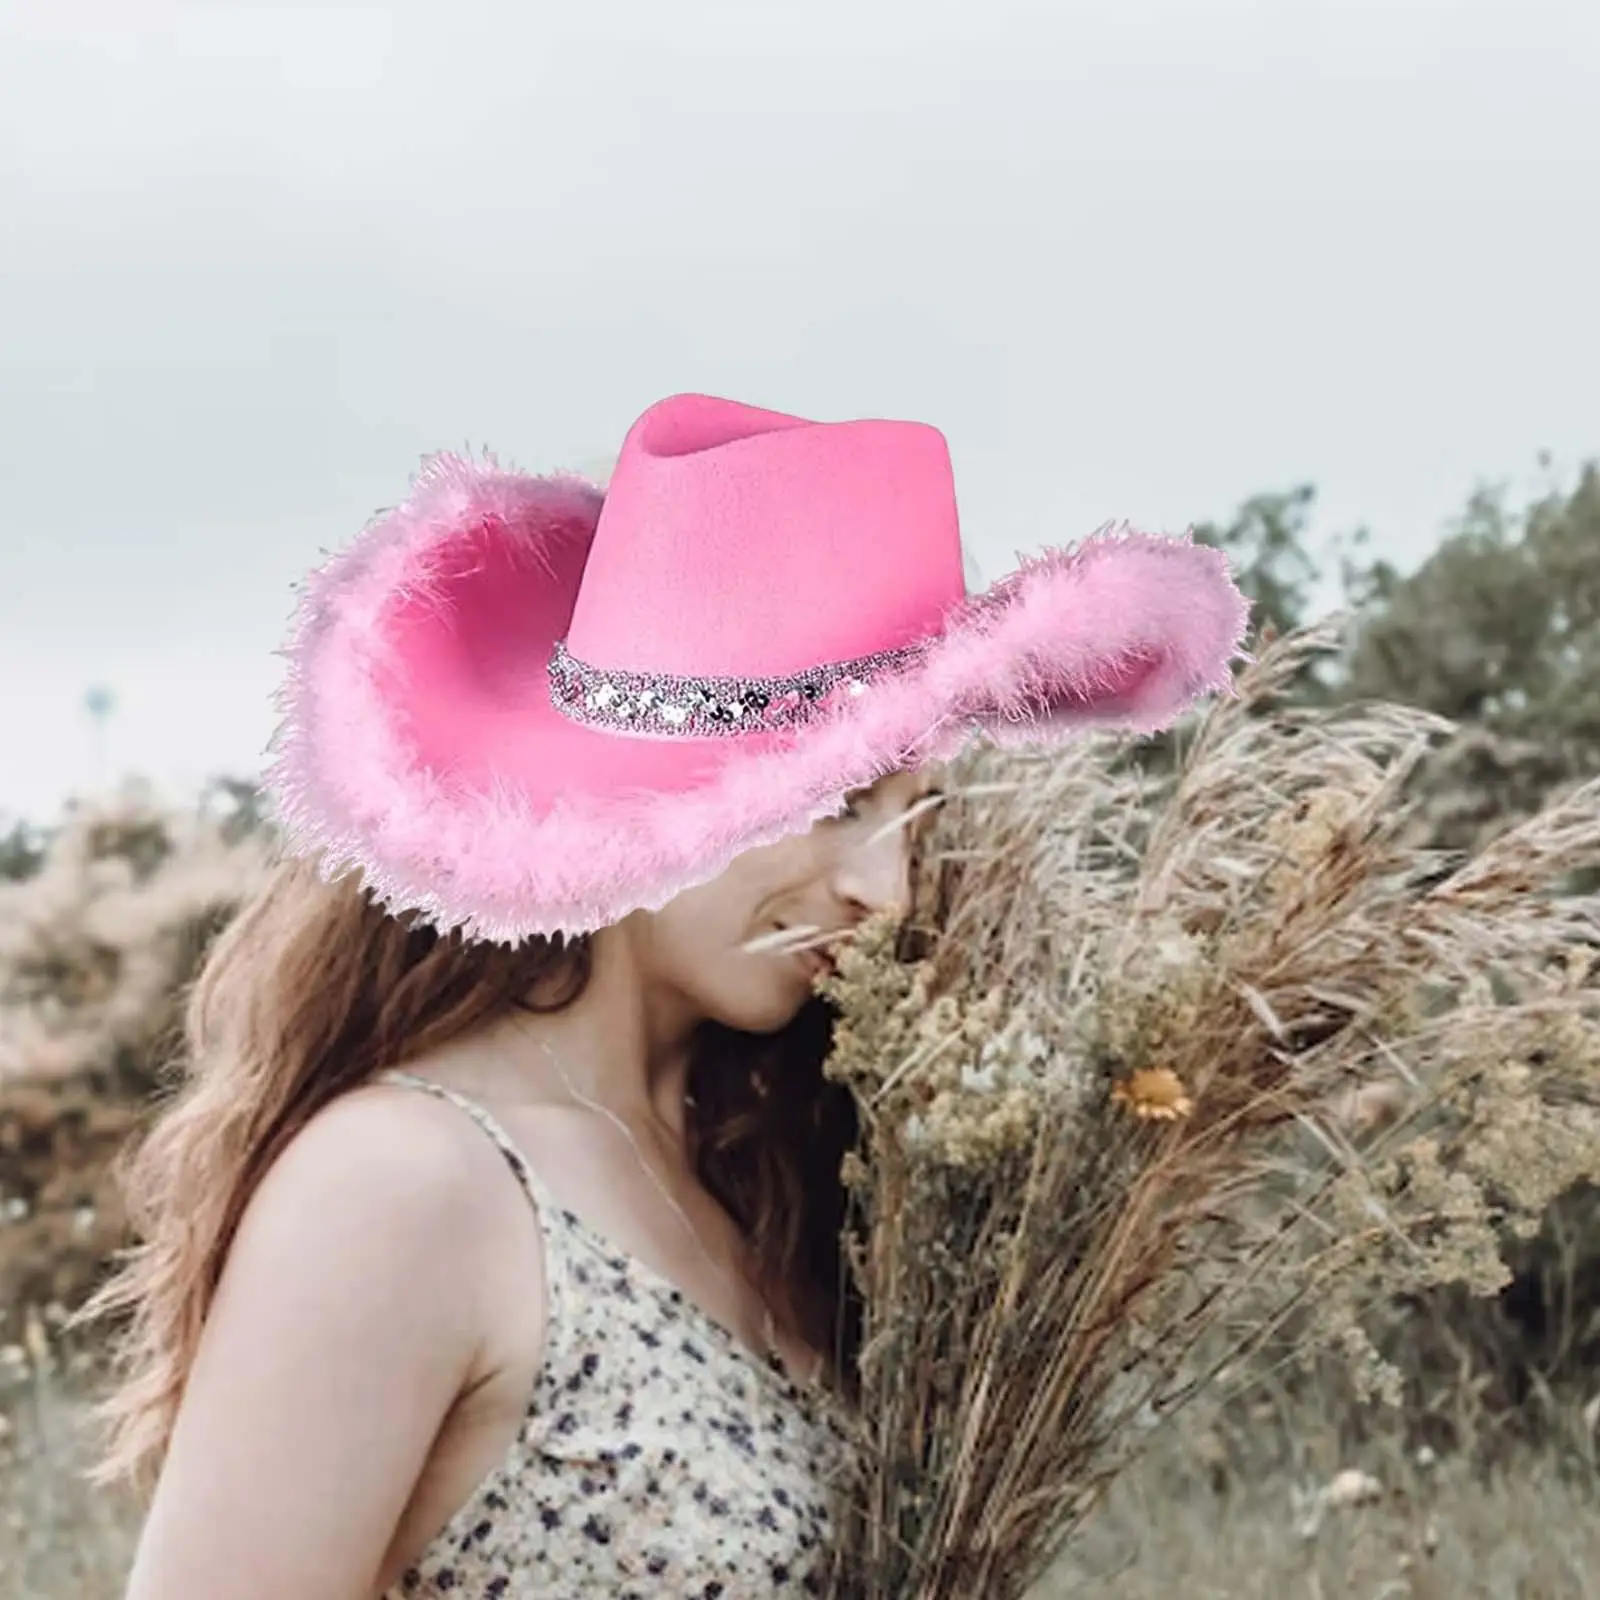 Western Style Cowgirl Hat Durable Chic Wide Brim Fashion Pink Cowboy Hat for Costume Holidays Party Festivals Beach